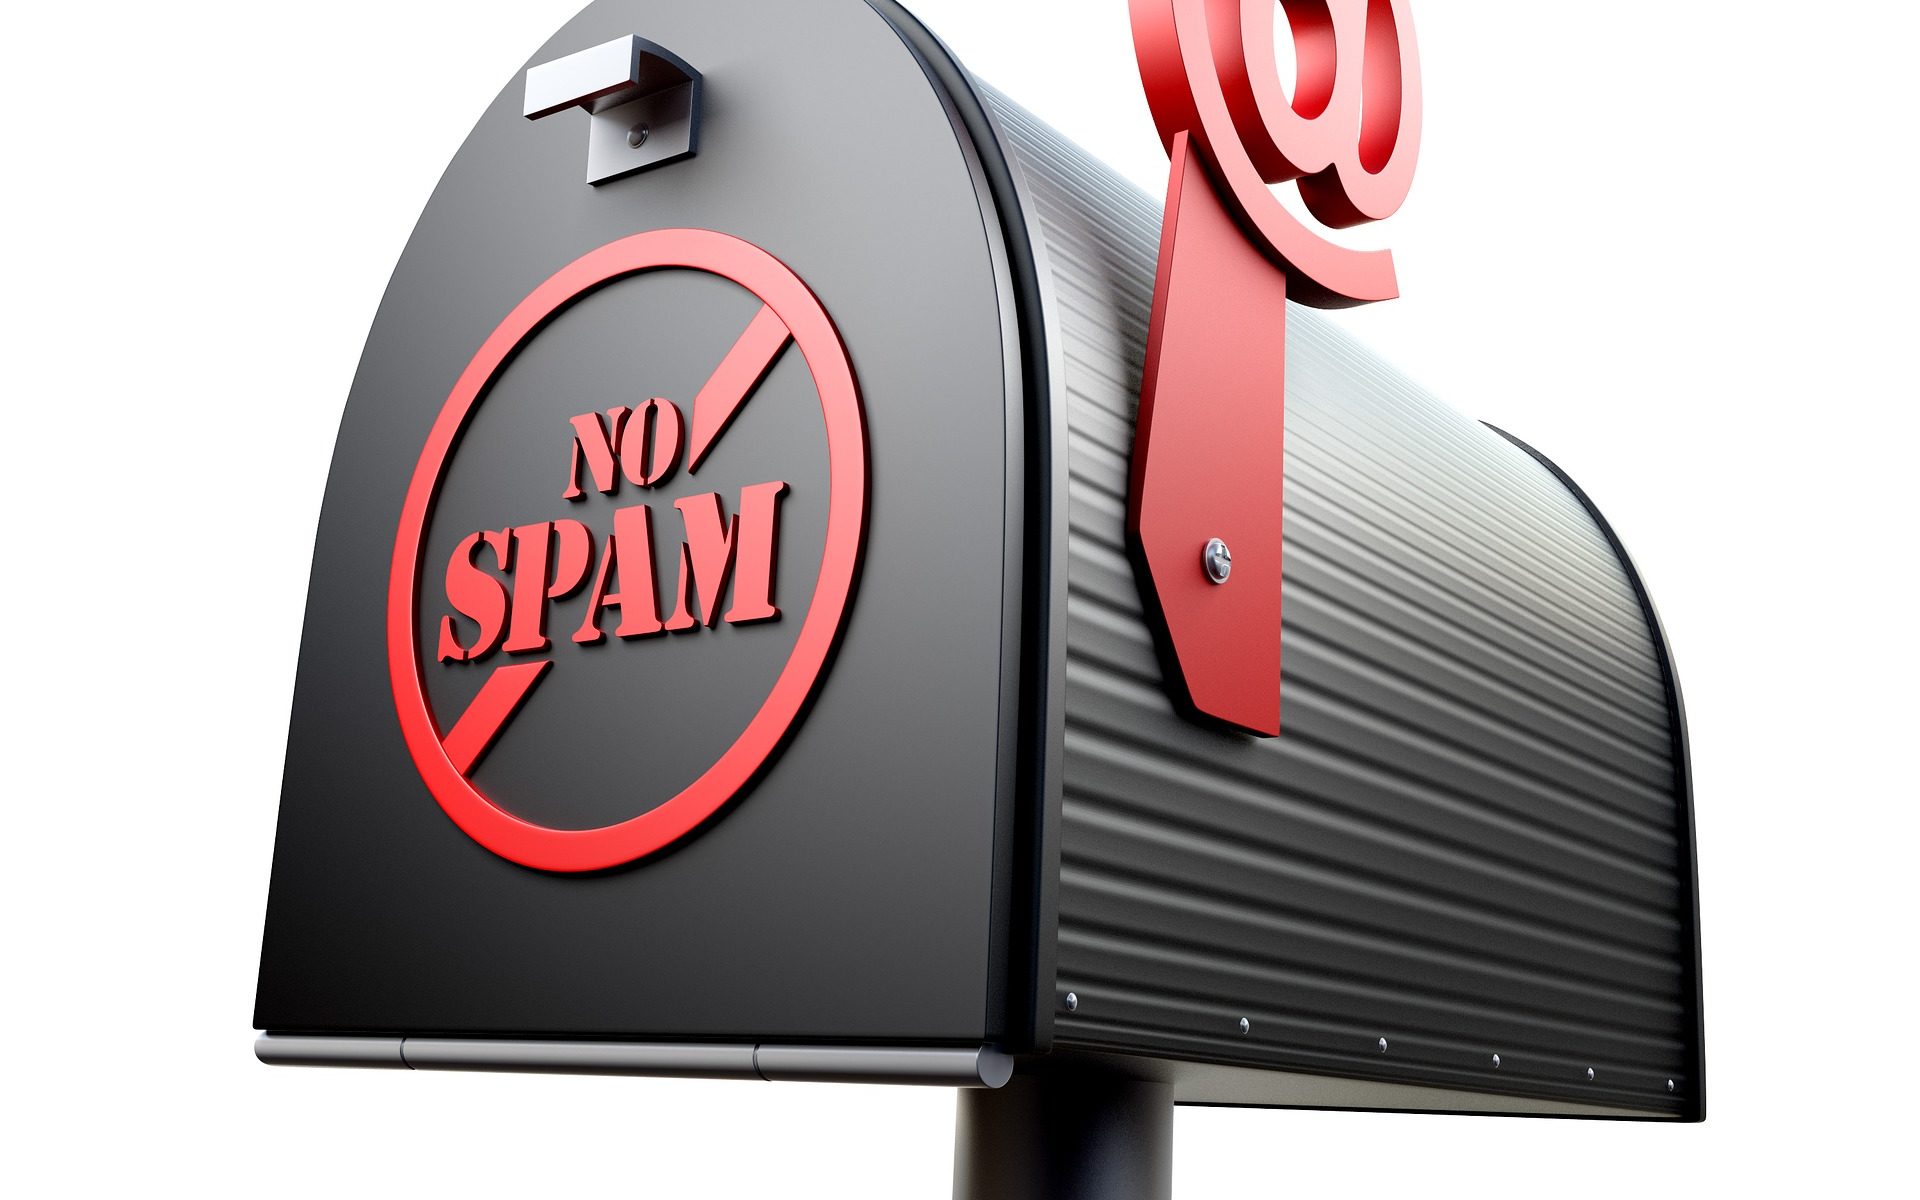 Mailbox with "no spam" written on the front.